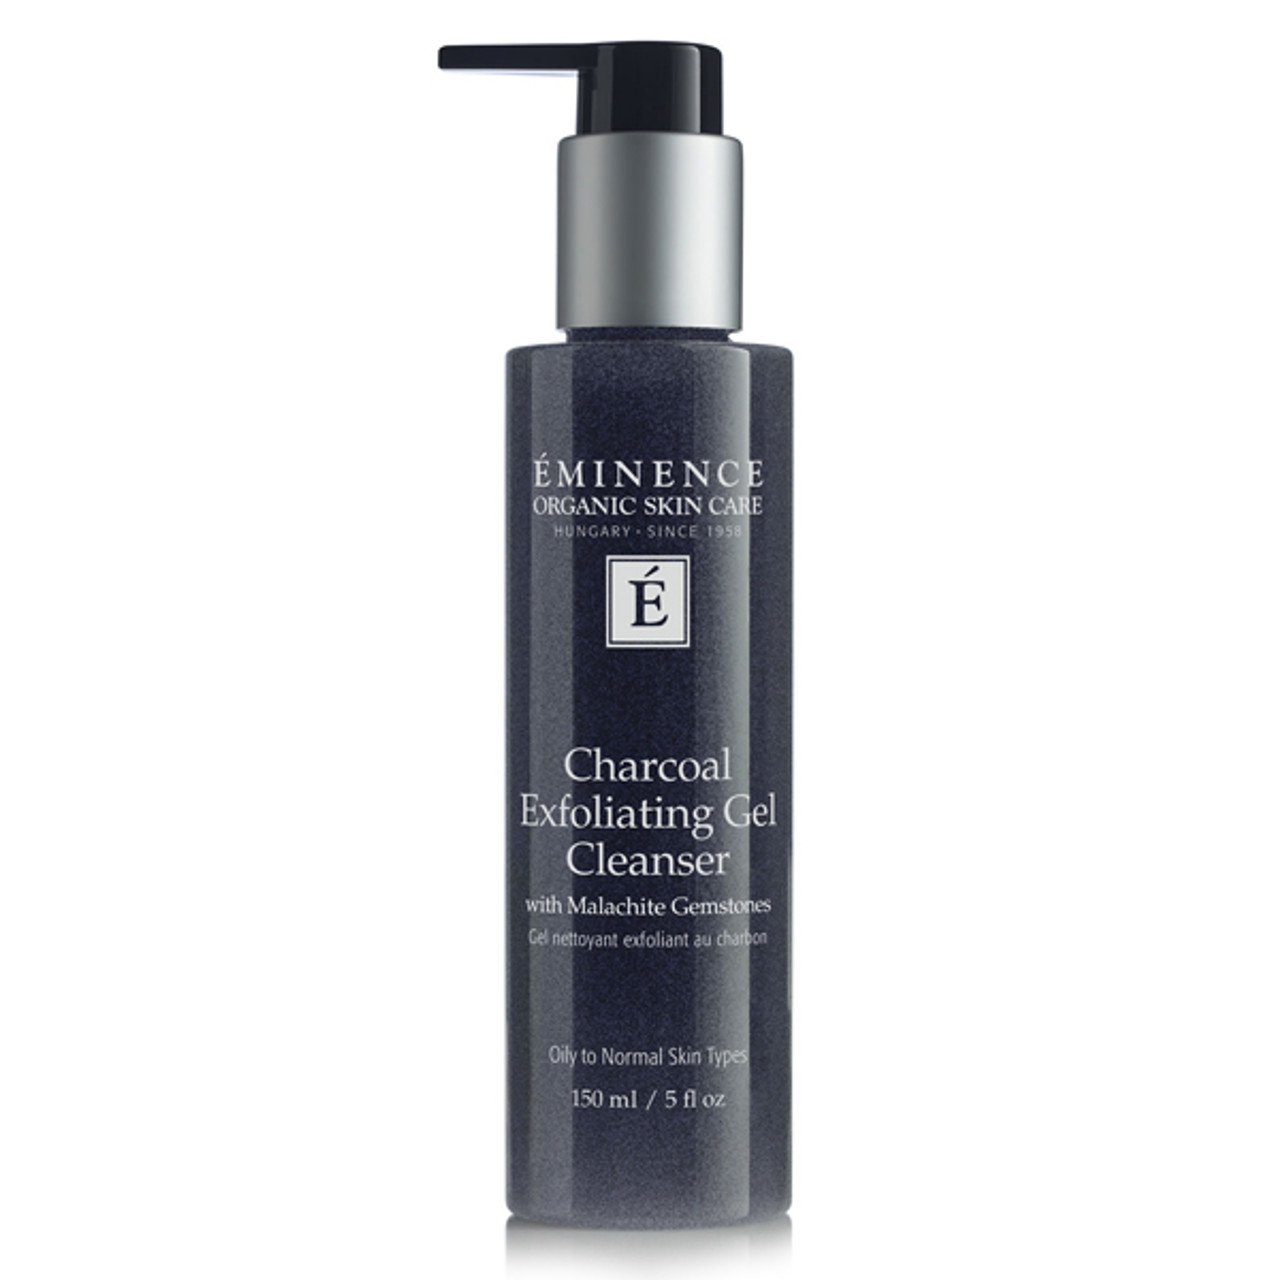 Eminence Charcoal Exfoliating Gel Cleanser | Malachite Extract